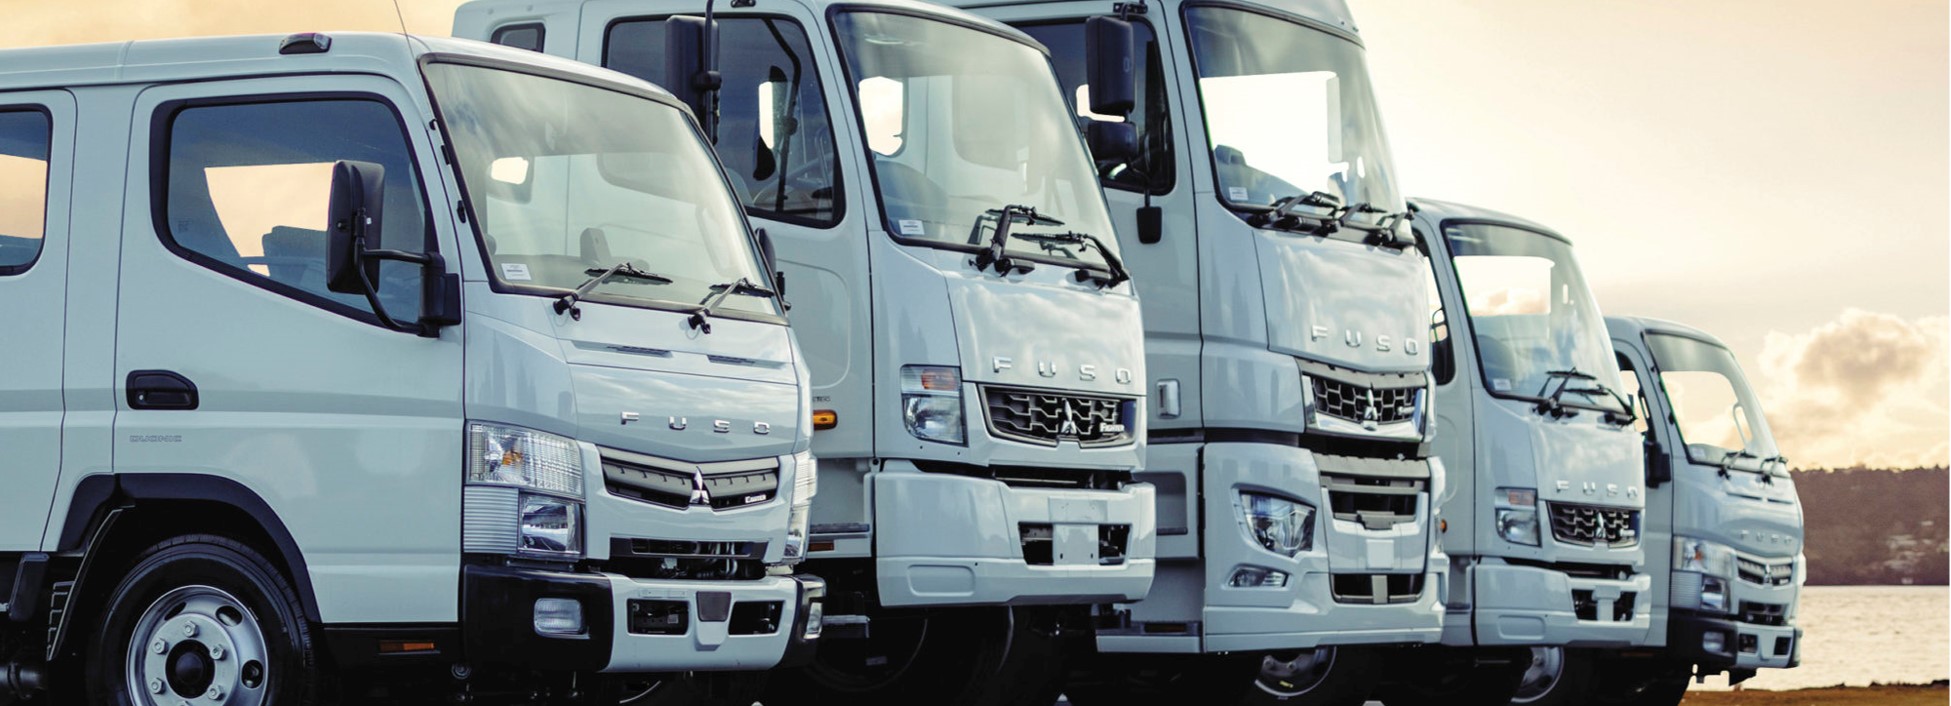 daimler-truck-increased-sales-achieved-in-2021-target-fuso-maintains-top-share-in-major-markets